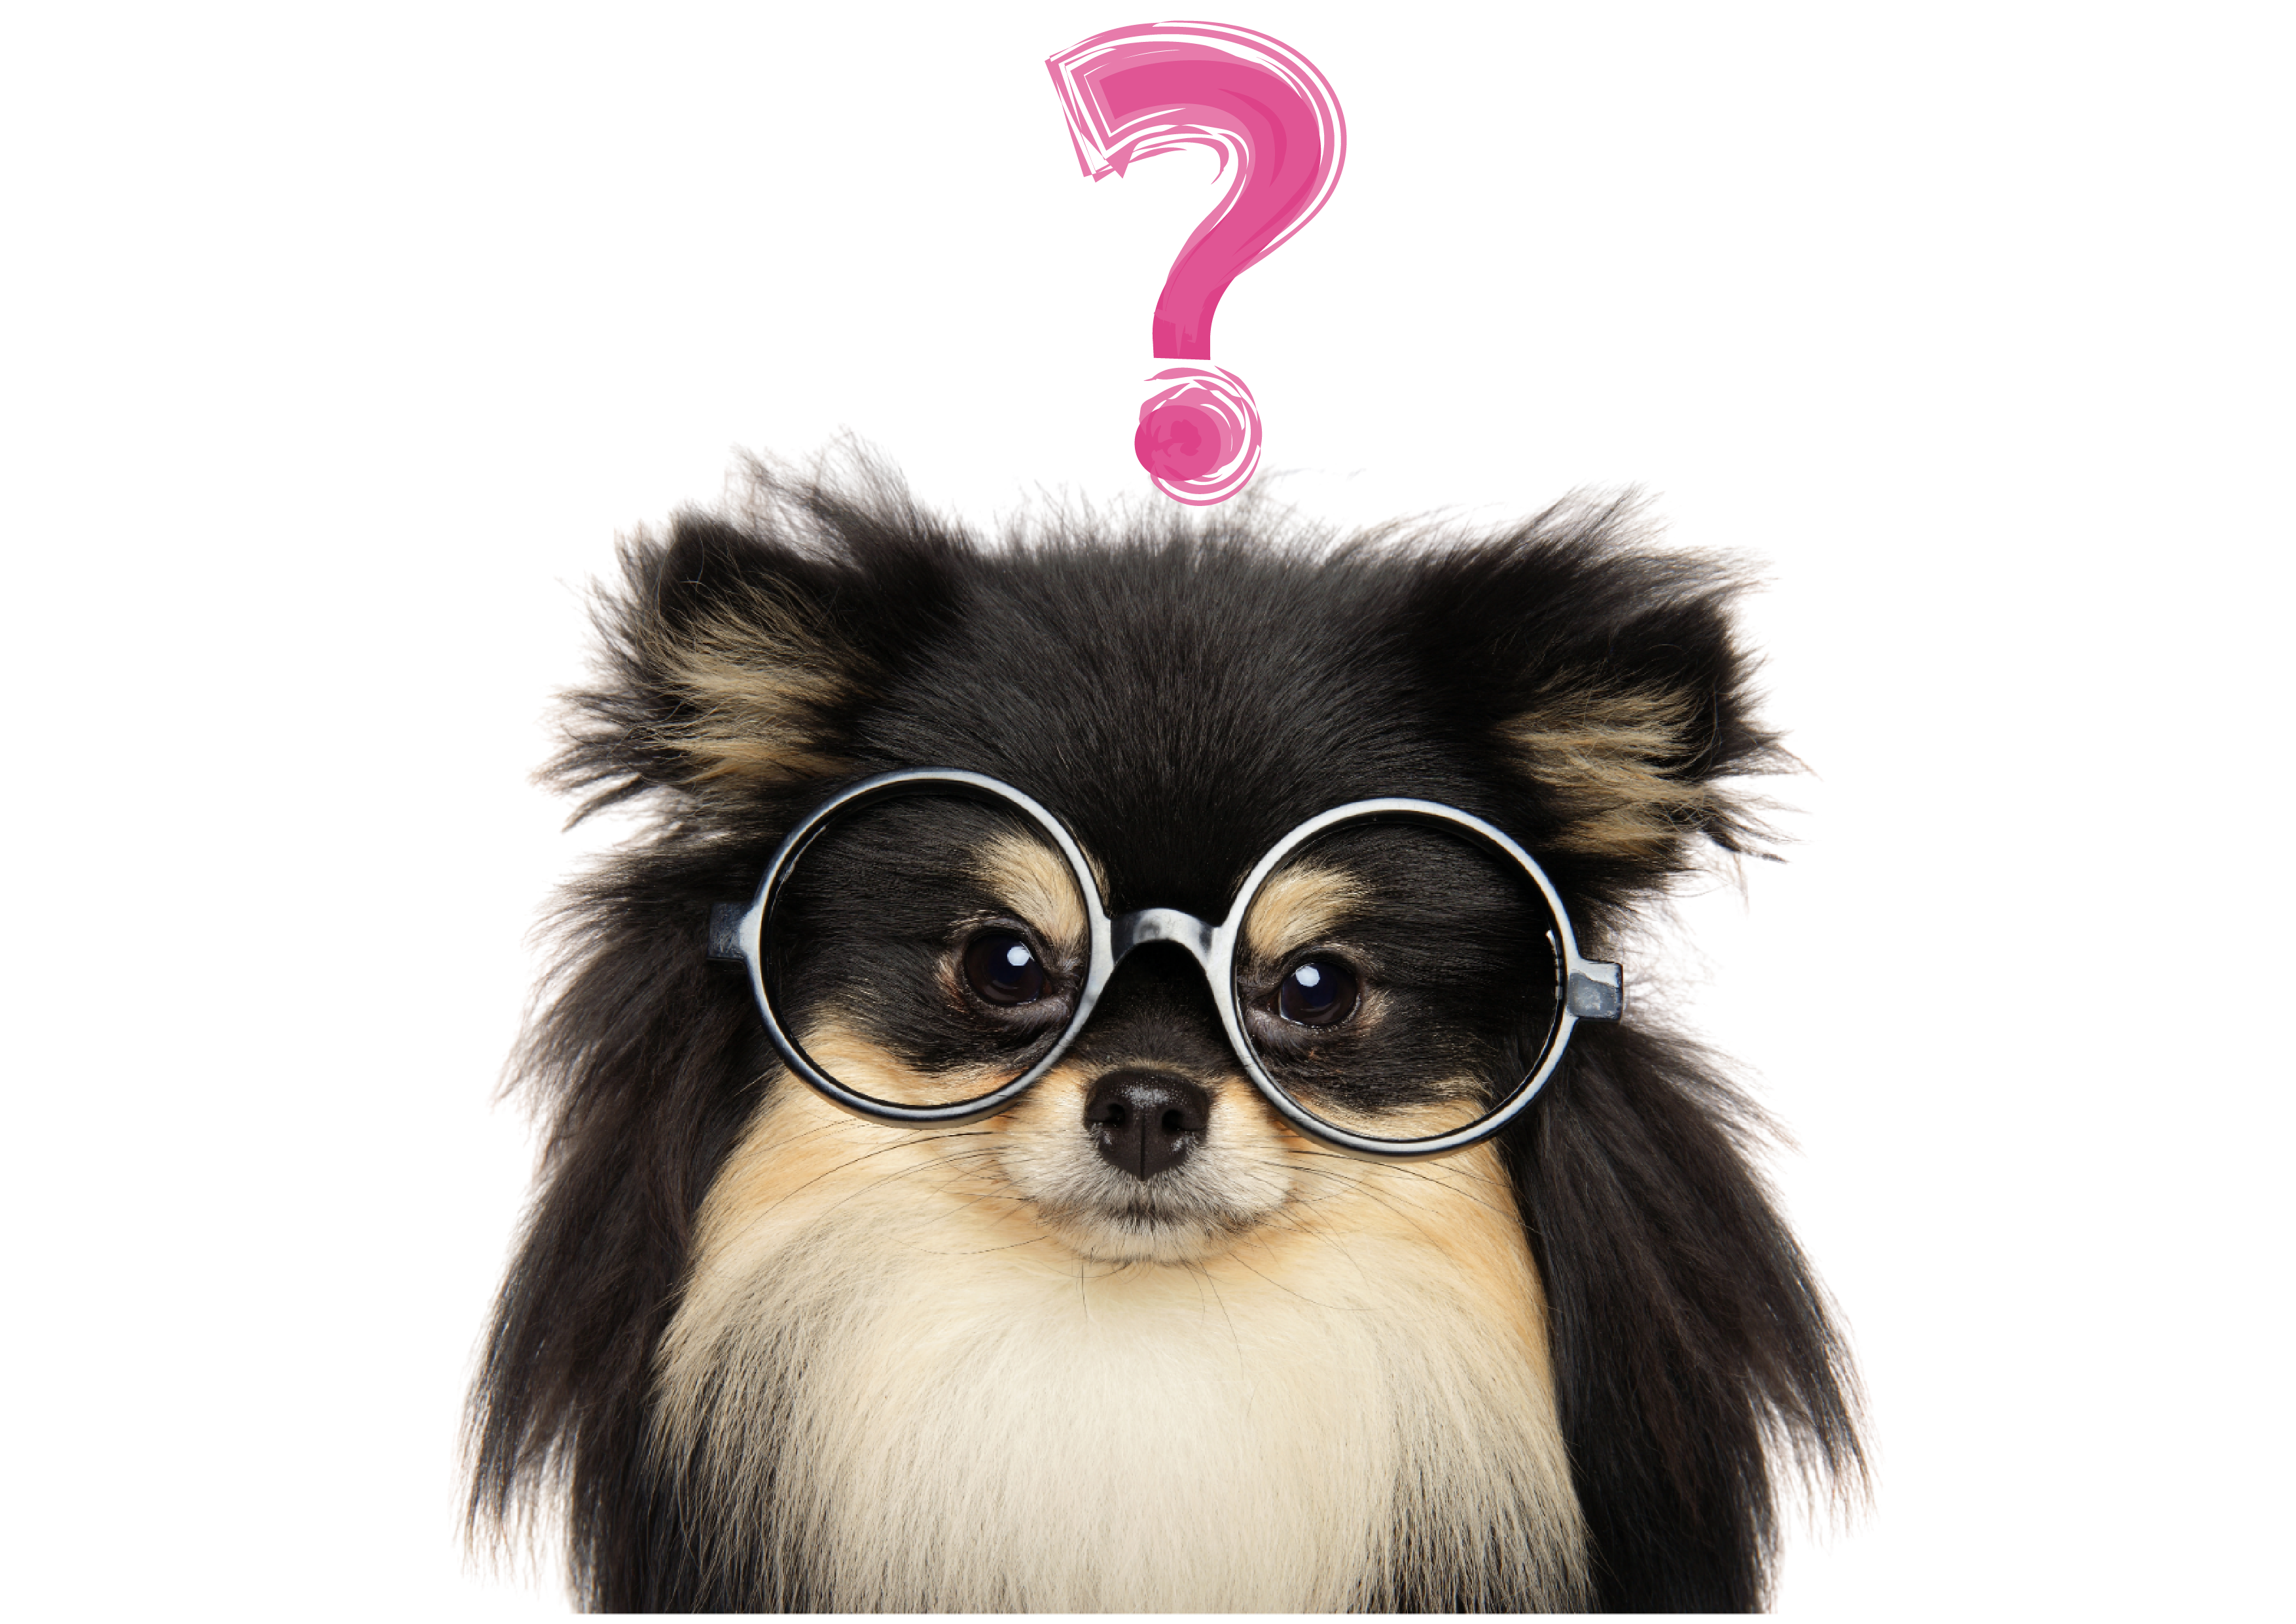 Dog wearing glasses with a question mark above its head.